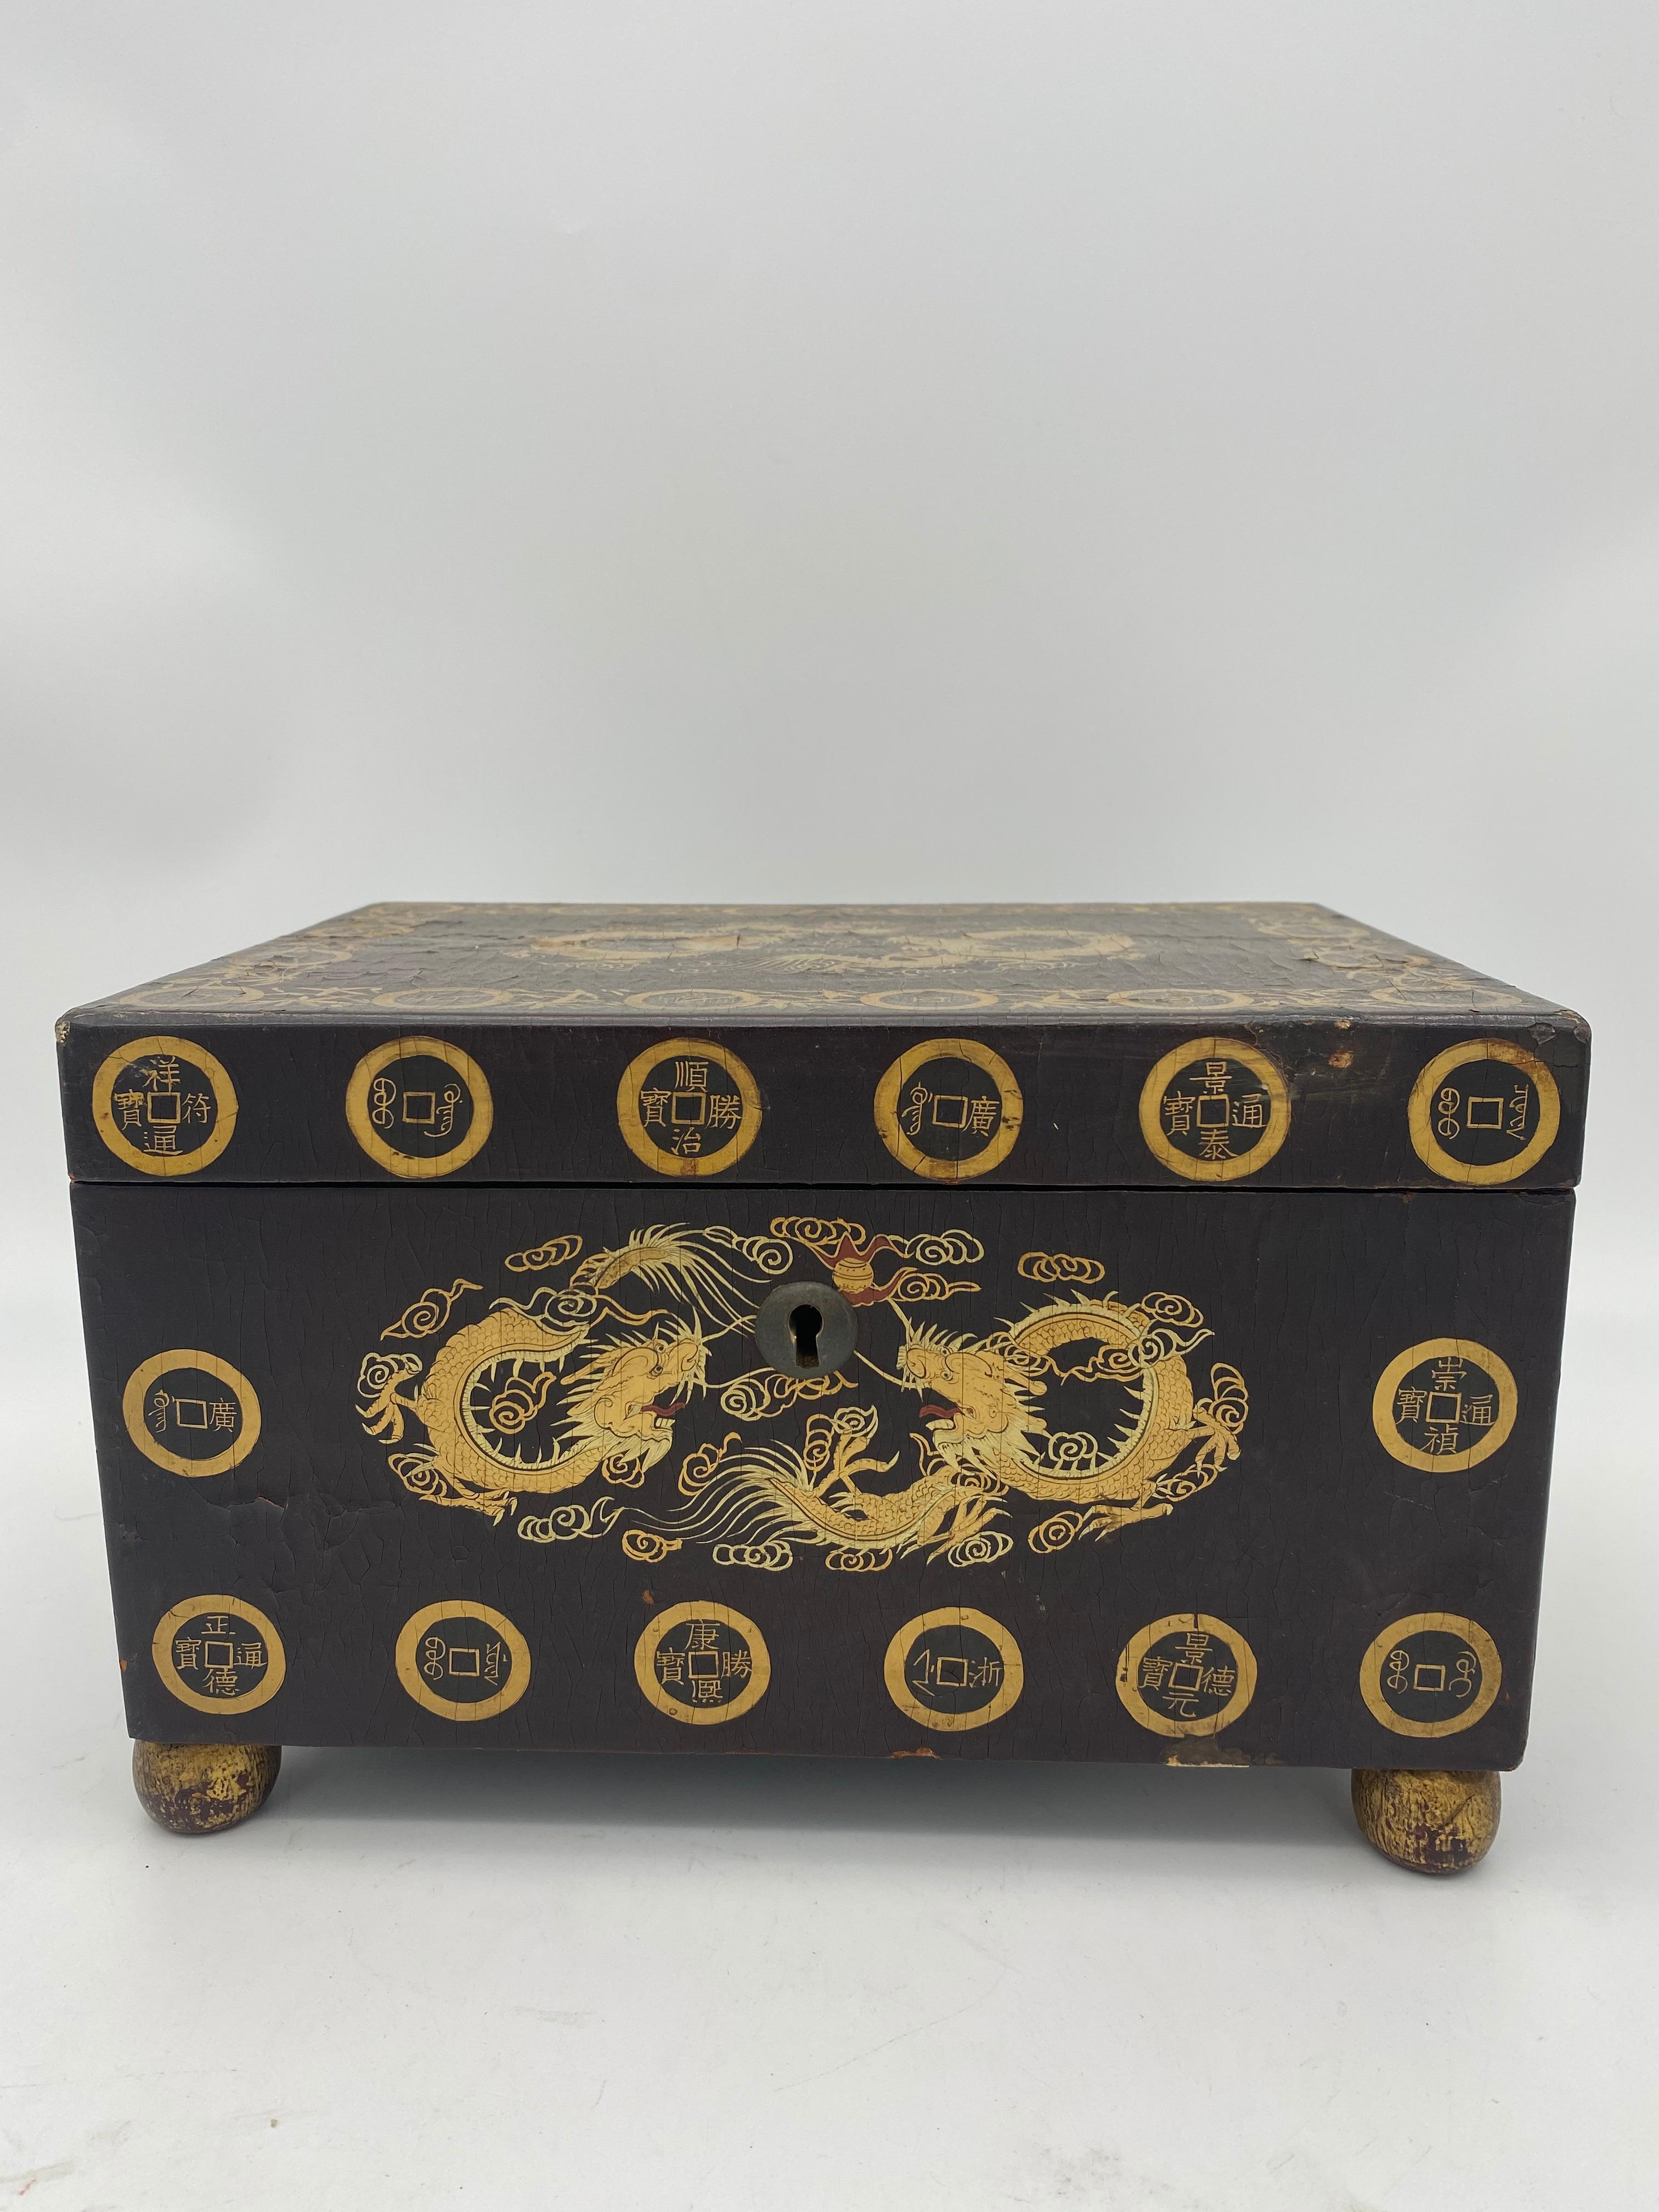 19th century golden black lacquer Chinese tea caddy with pewter and a key, the rectangular-section body decorated with dragons, a very beautiful piece. See more pictures, measures: 7